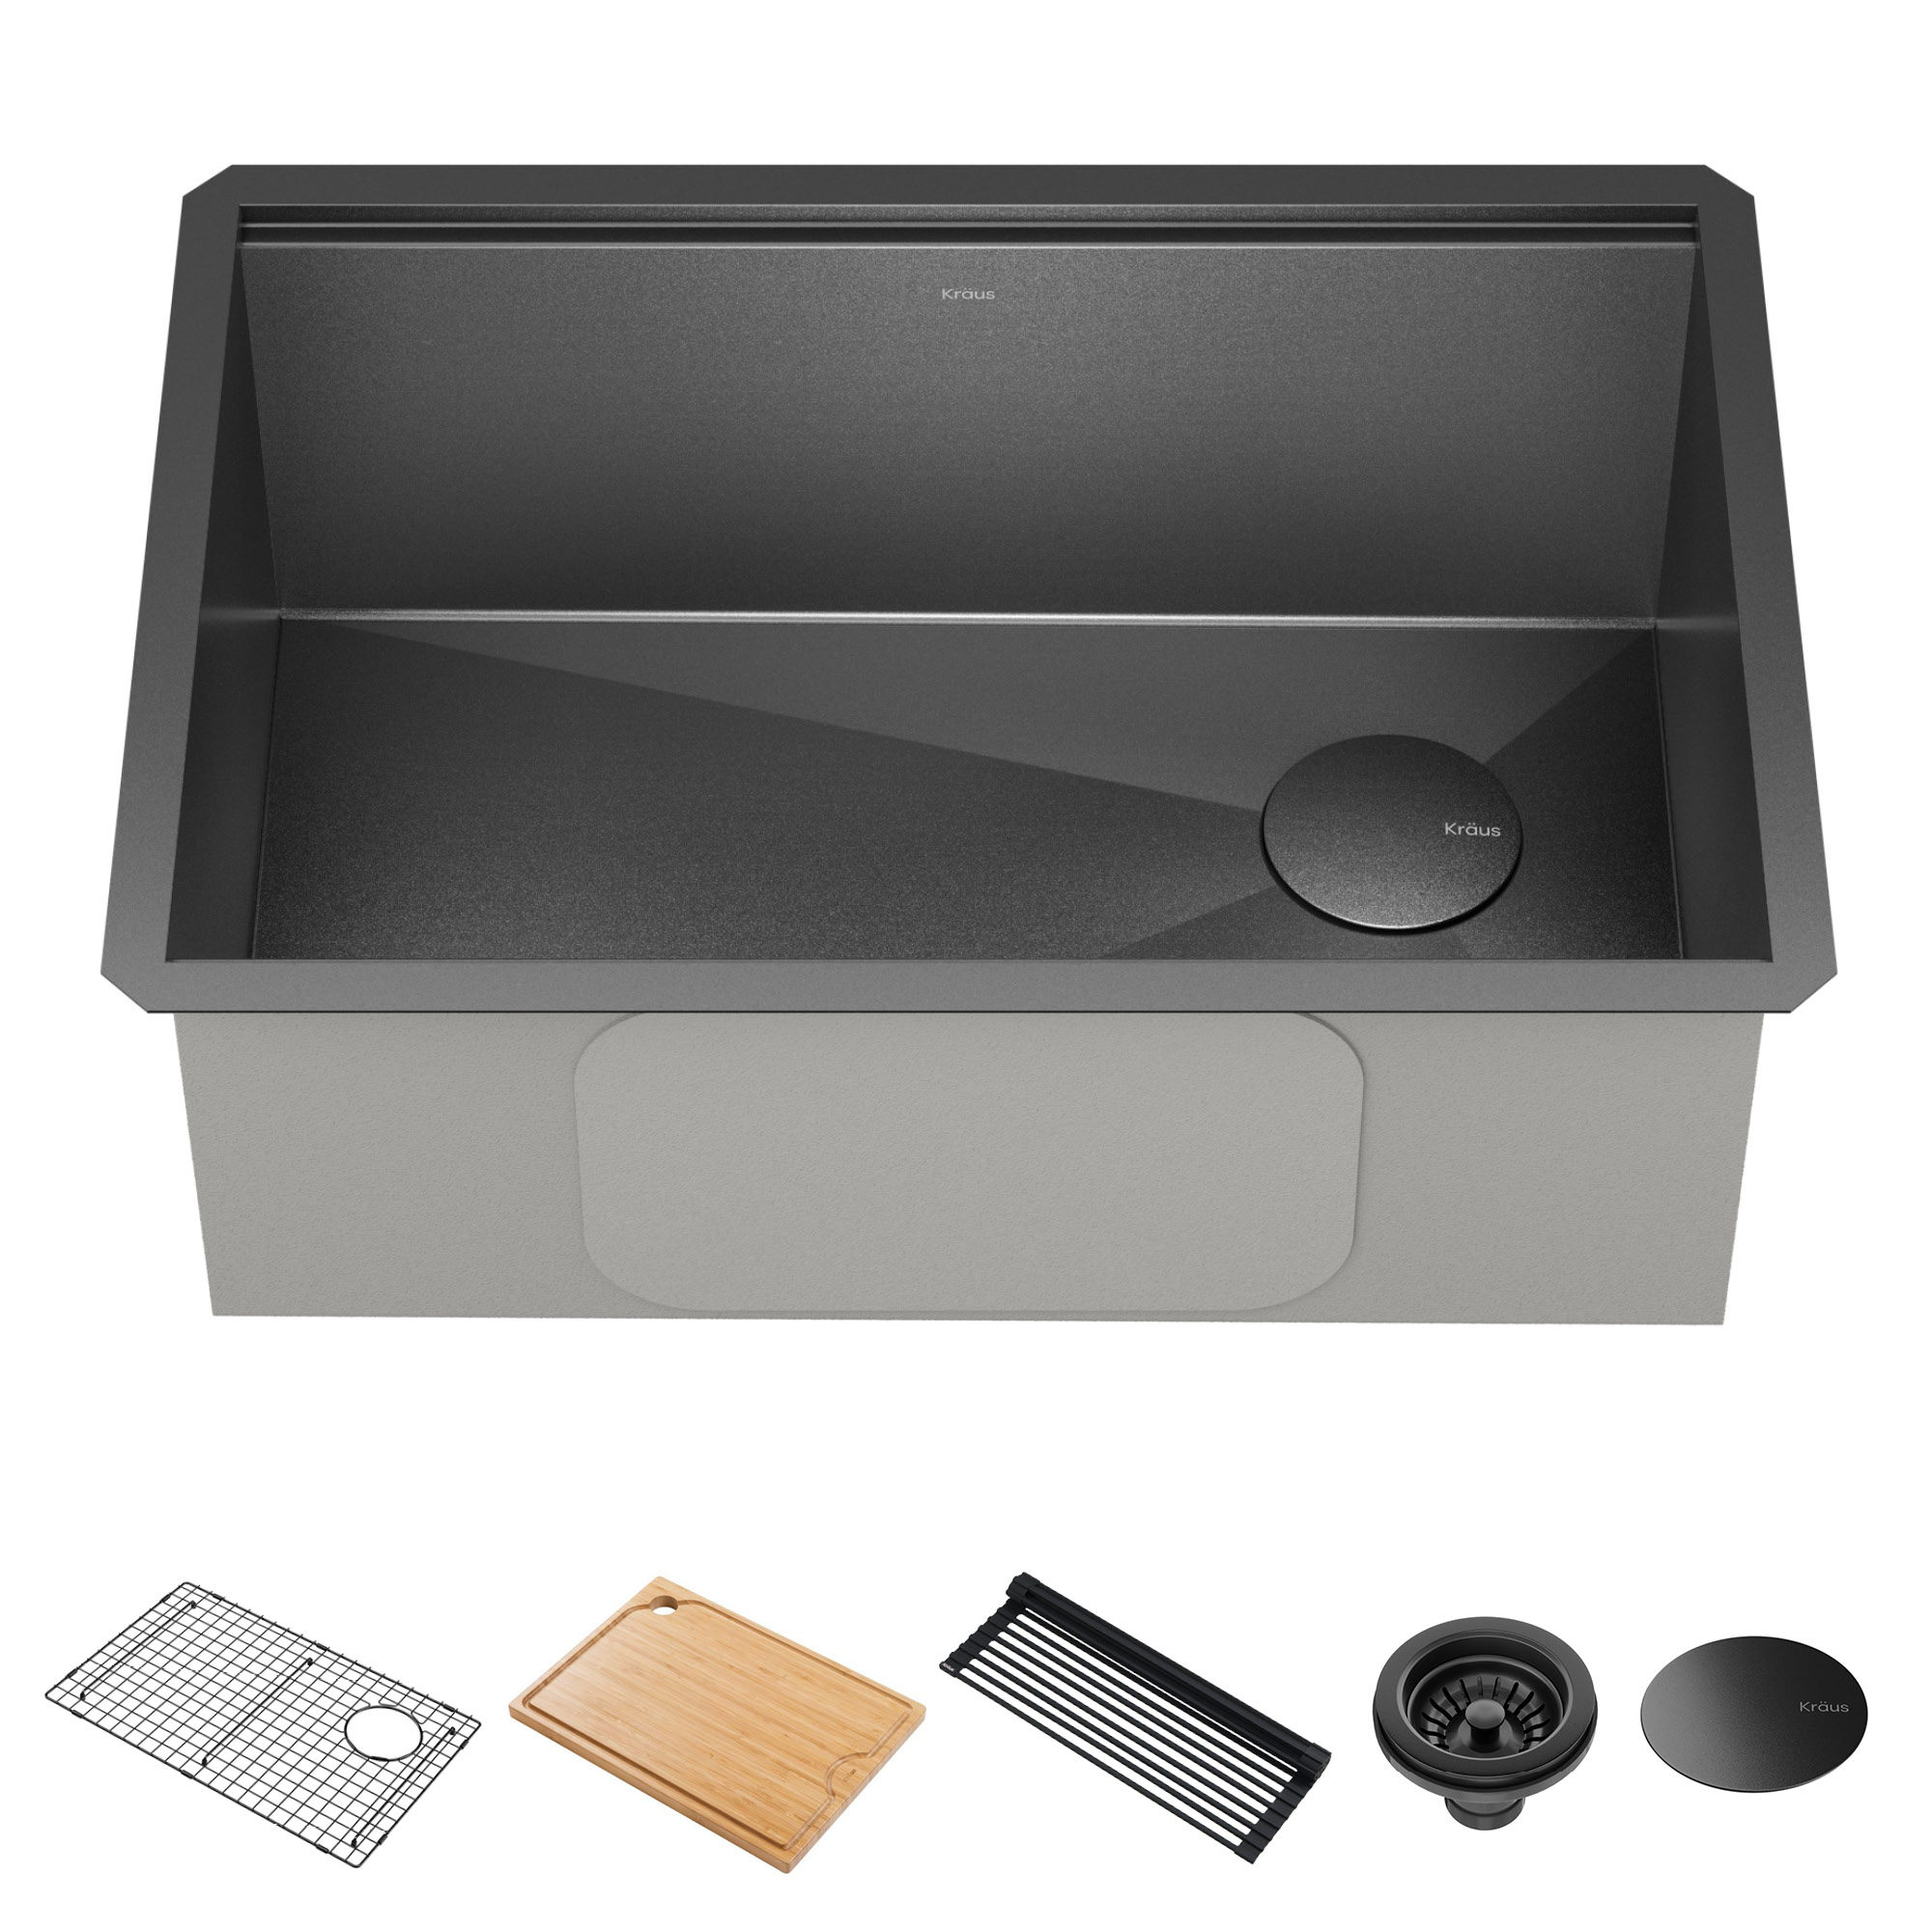 KRAUS KWU110-27-PGM KORE 27 INCH  UNDERMOUNT WORKSTATION 16 GAUGE STAINLESS STEEL SINGLE BOWL KITCHEN SINK WITH ACCESSORIES IN PVD GUNMETAL FINISH WITH ACCESSORIES